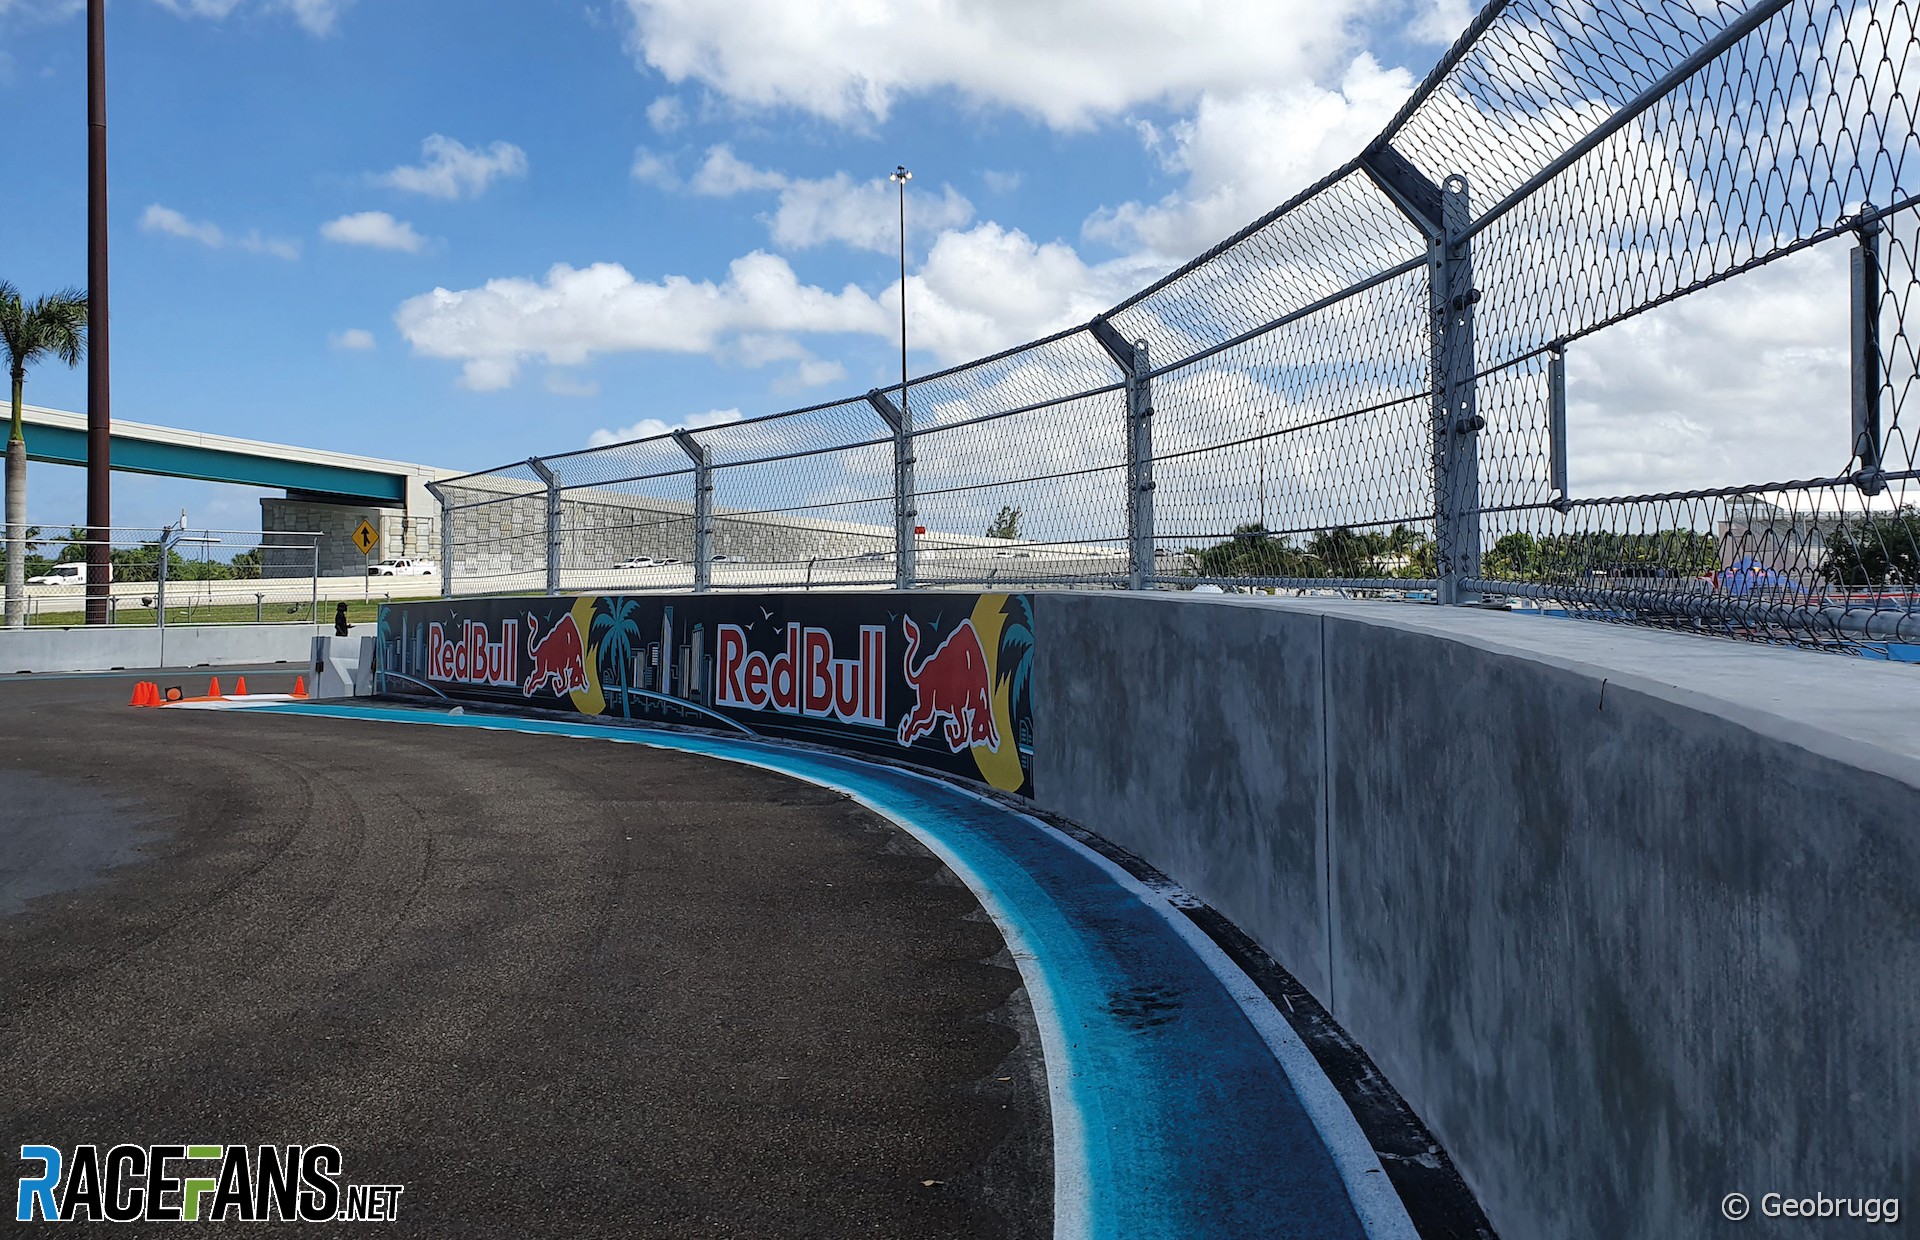 Turn 14 “mistake generator” designed to catch drivers out on new Miami track | RaceFans Round-up